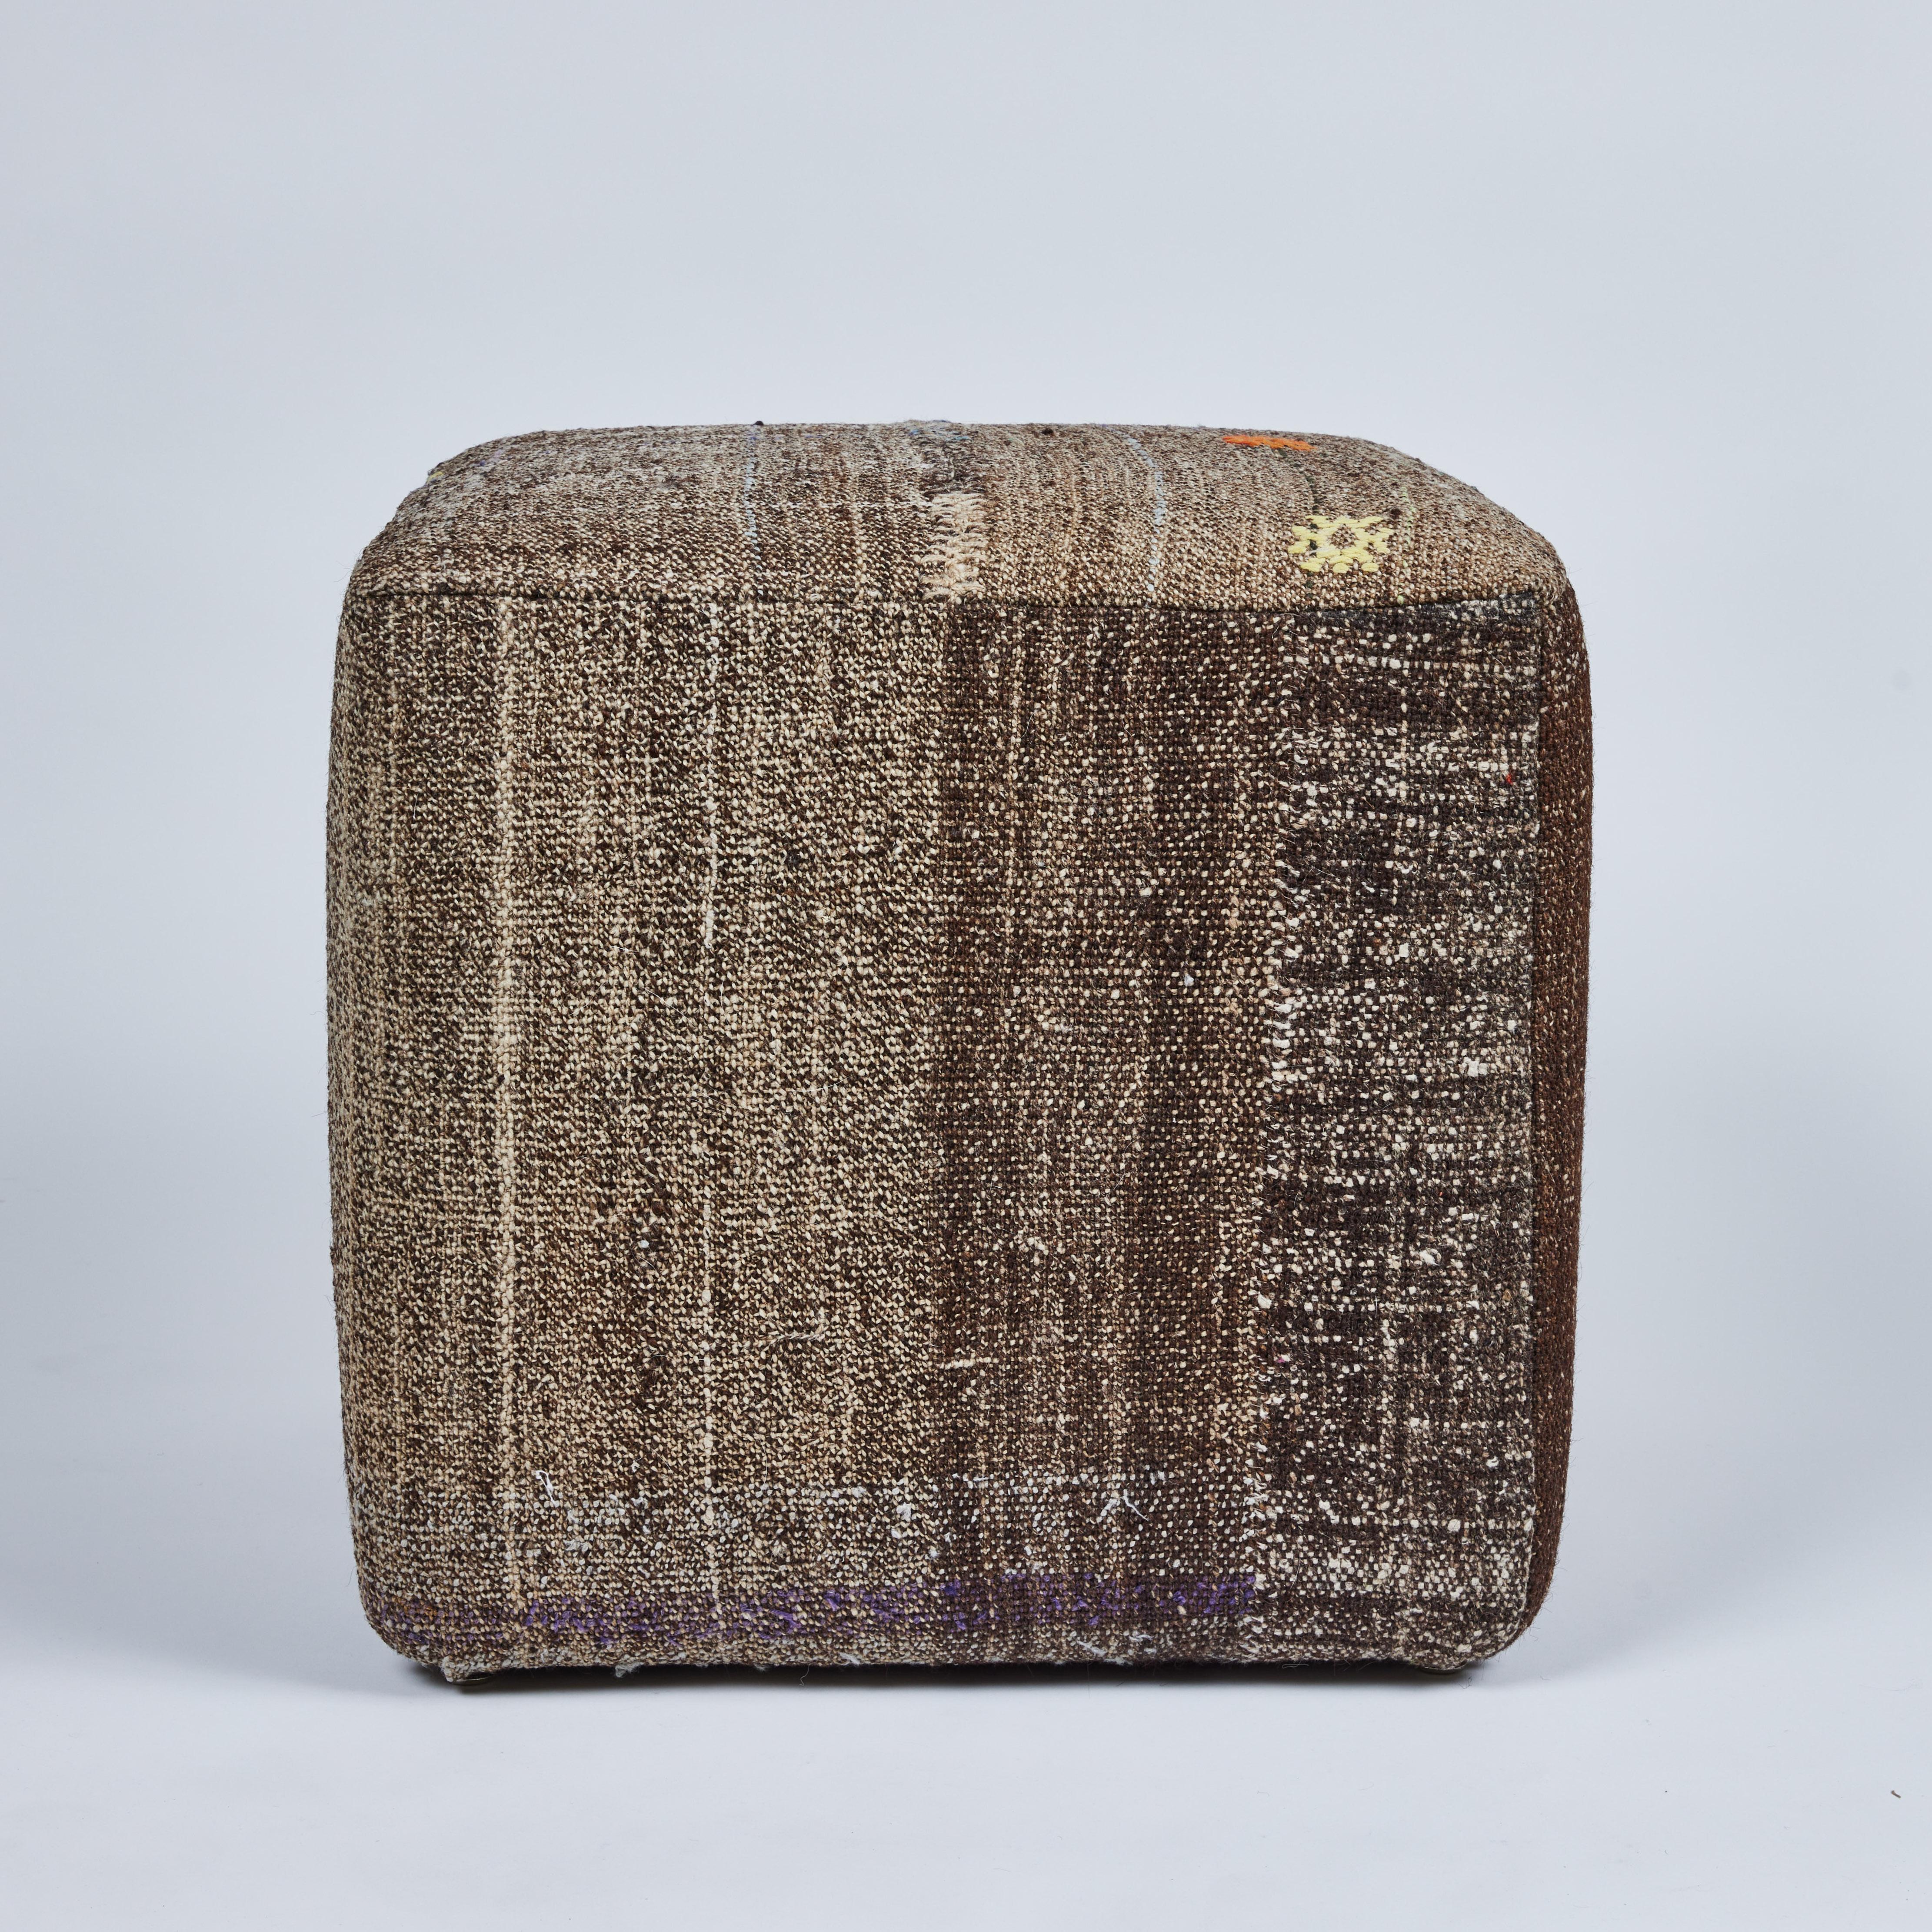 This cool custom cube stool has been upholstered in a handsome vintage wool rug. It is a muted brown and cream patterned base with accent touches of orchid, yellow, orange, green, blue and red stitched and woven throughout the overall pattern. It